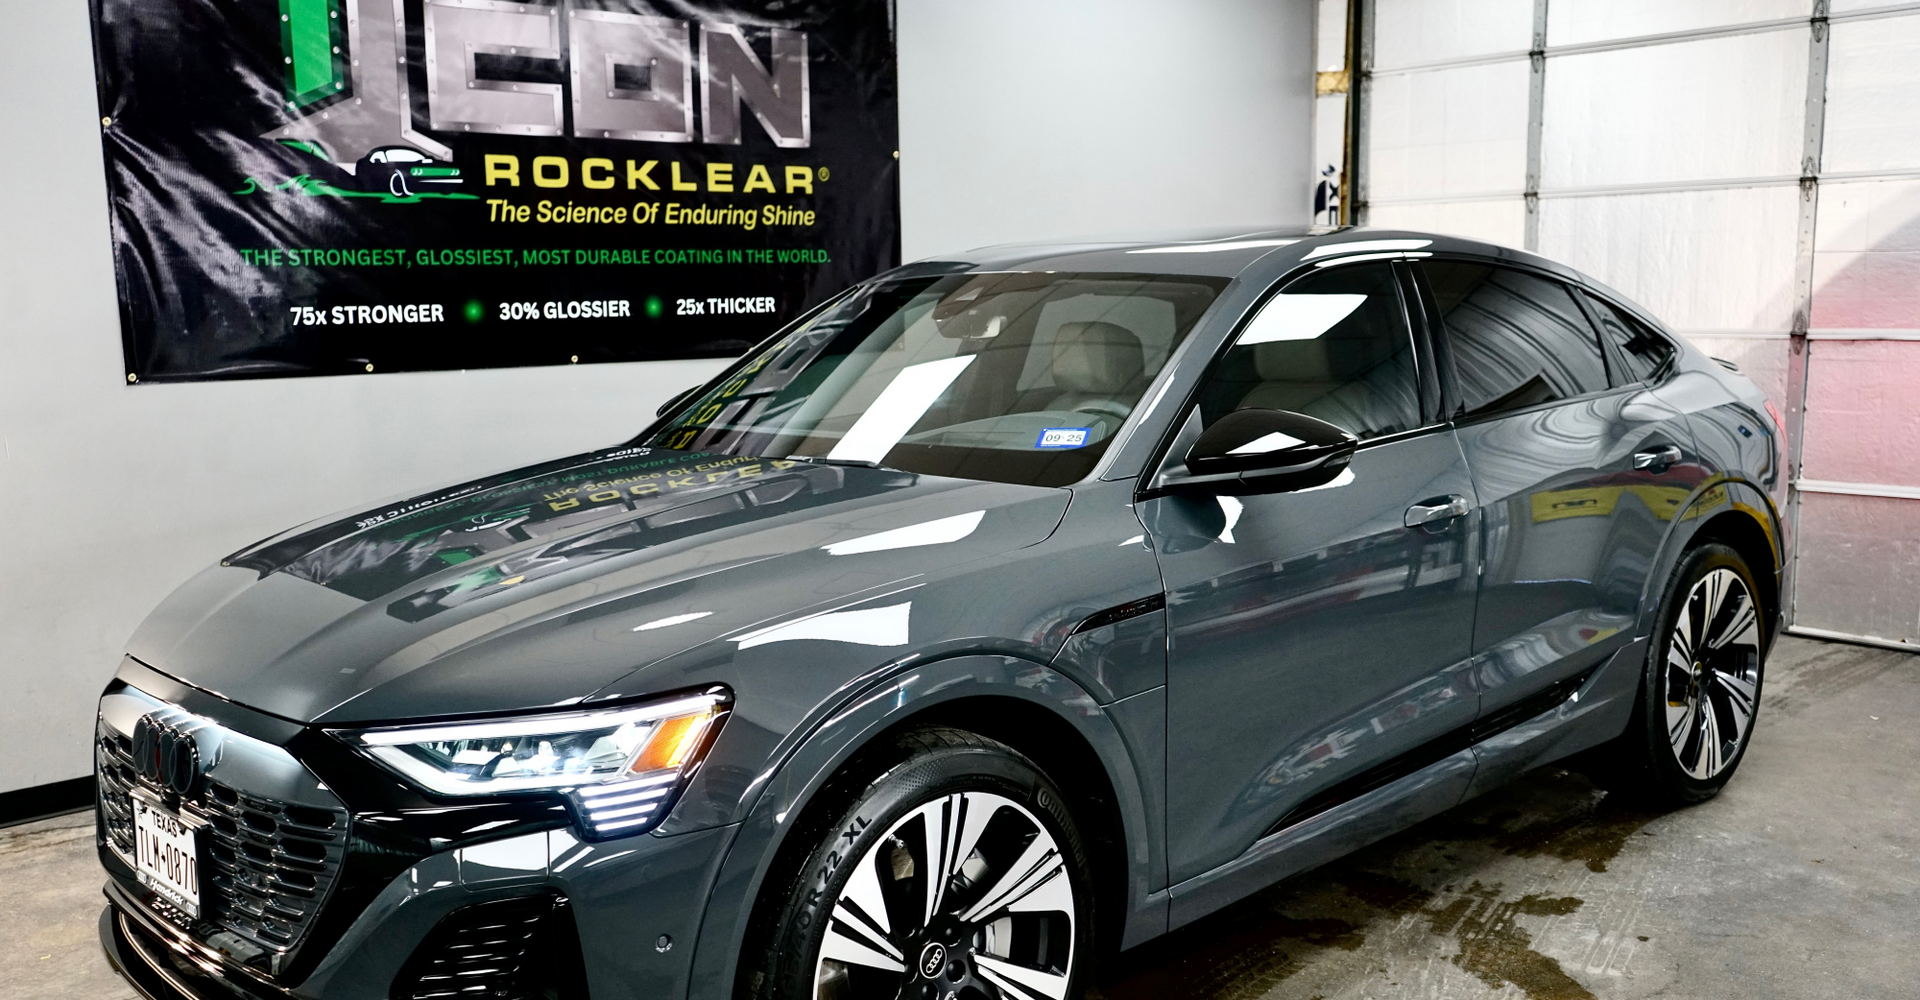 A gray audi e-tron is parked in front of a garage door.